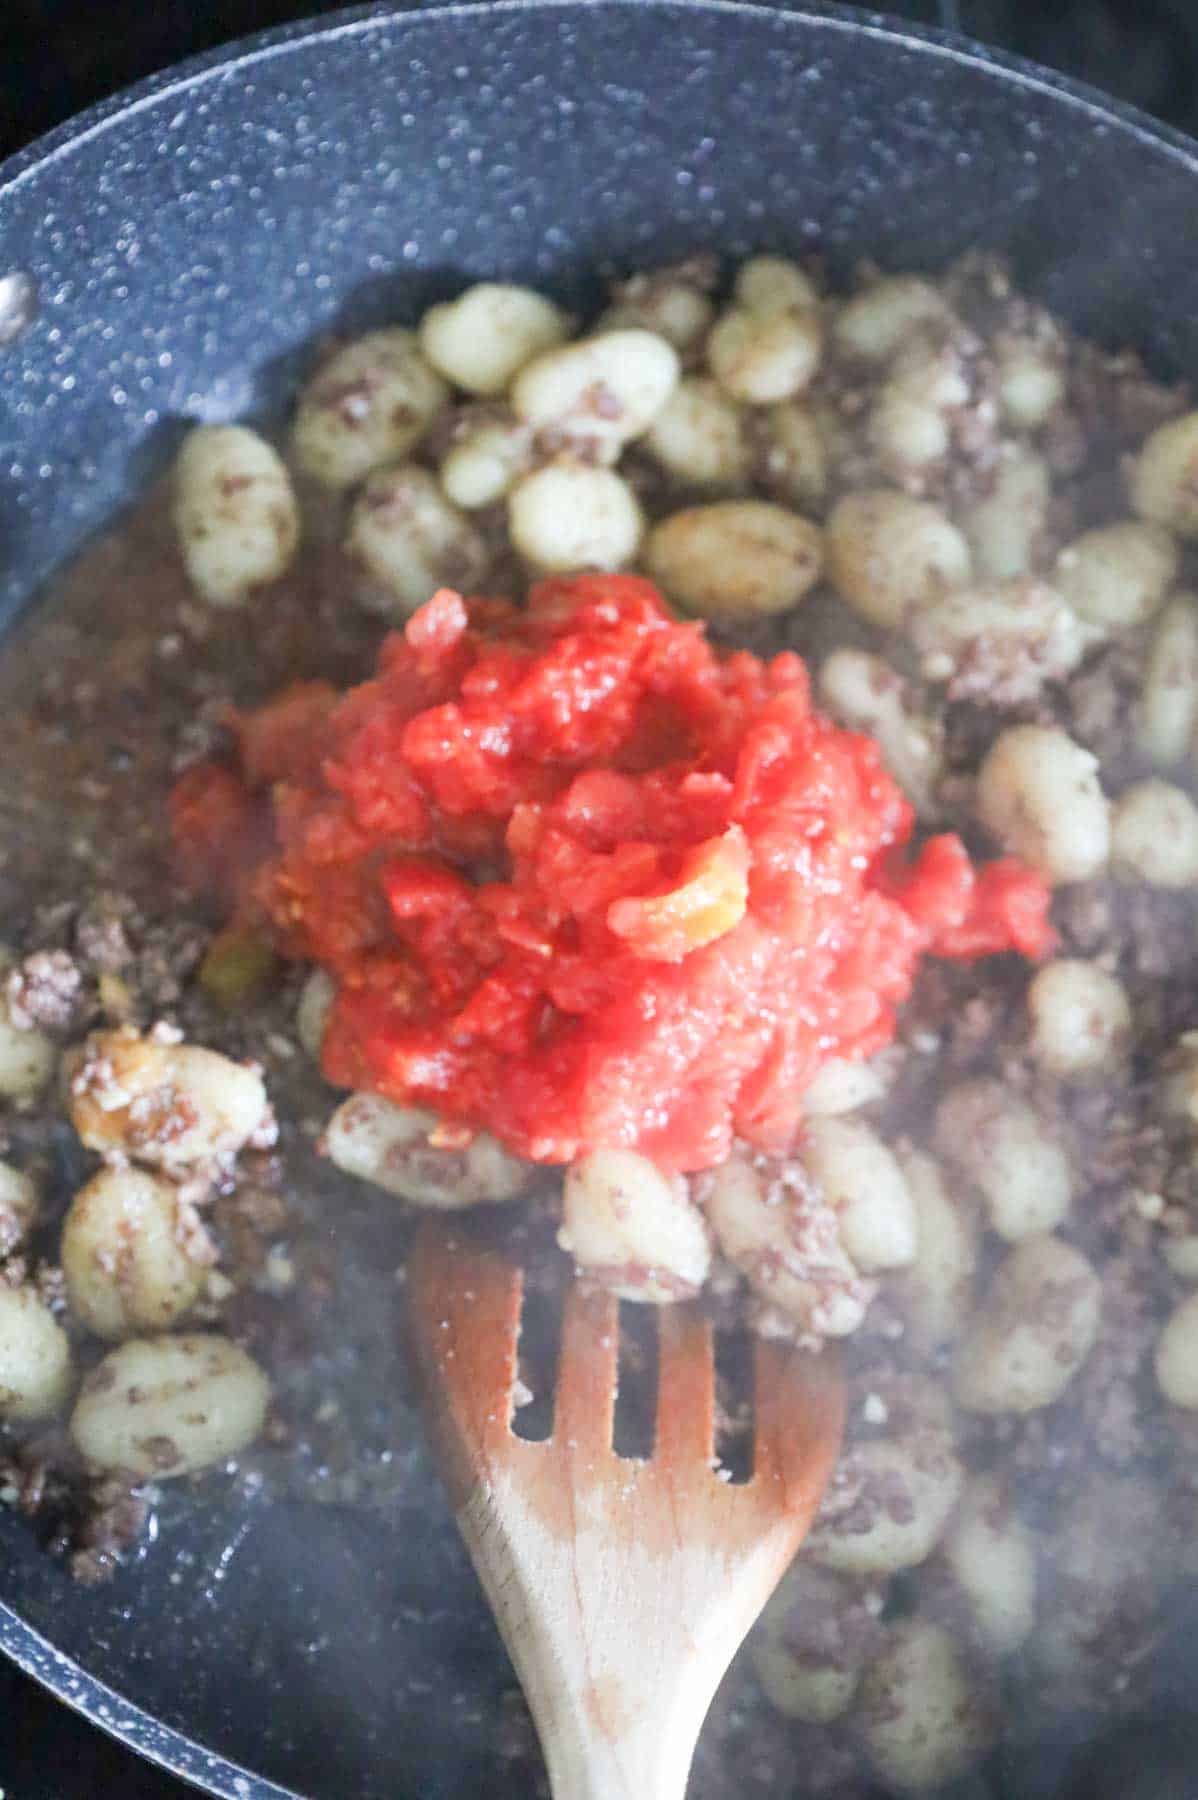 Rotel on top of gnocchi and ground beef mixture in a skillet